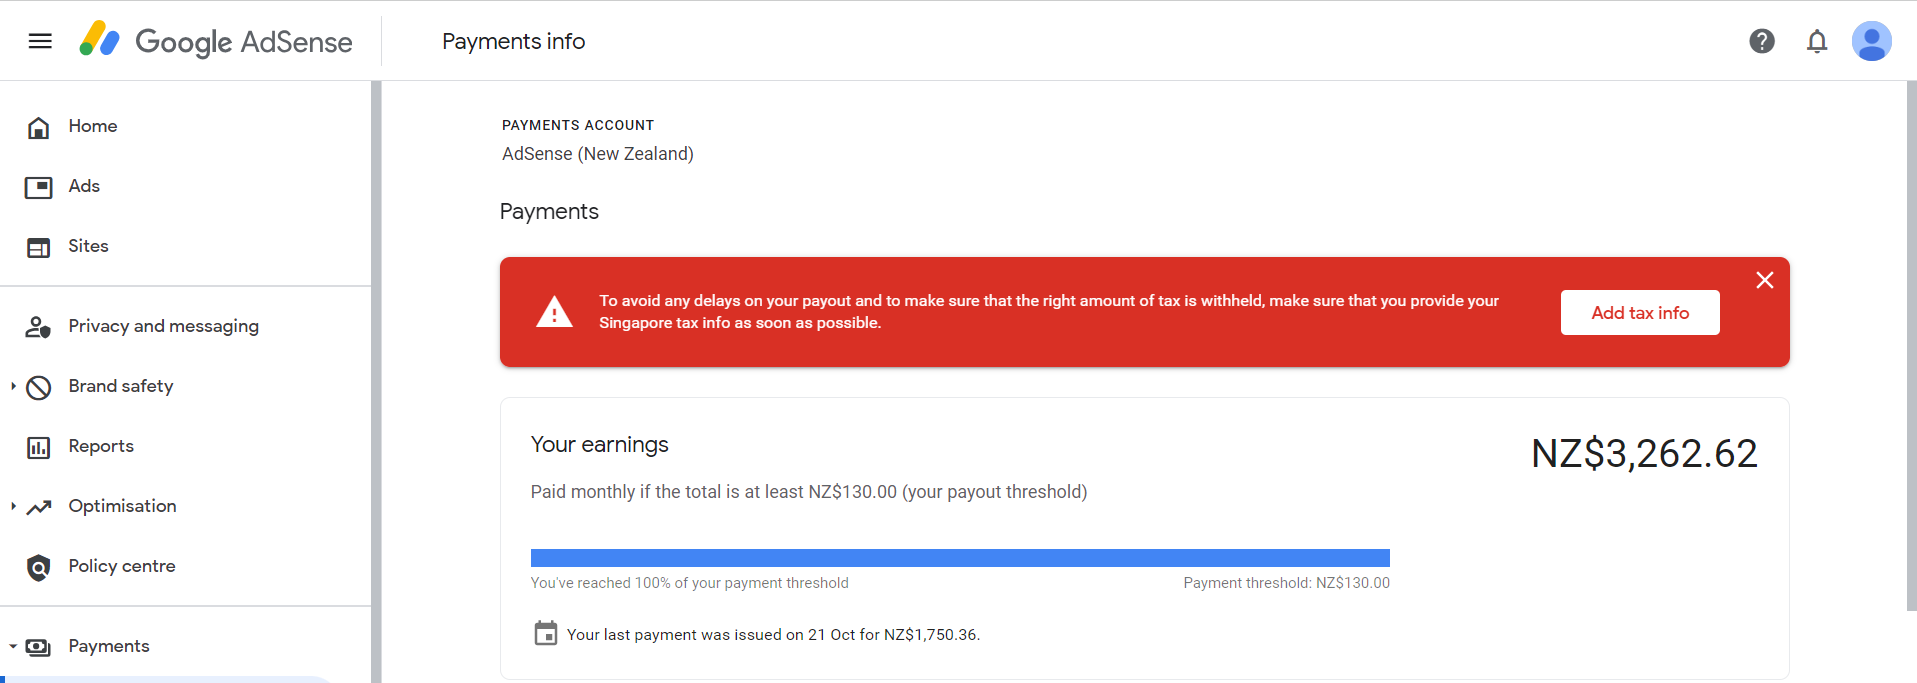 [Solved] Google Adsense “Singapore Tax info” Error under Payments Section